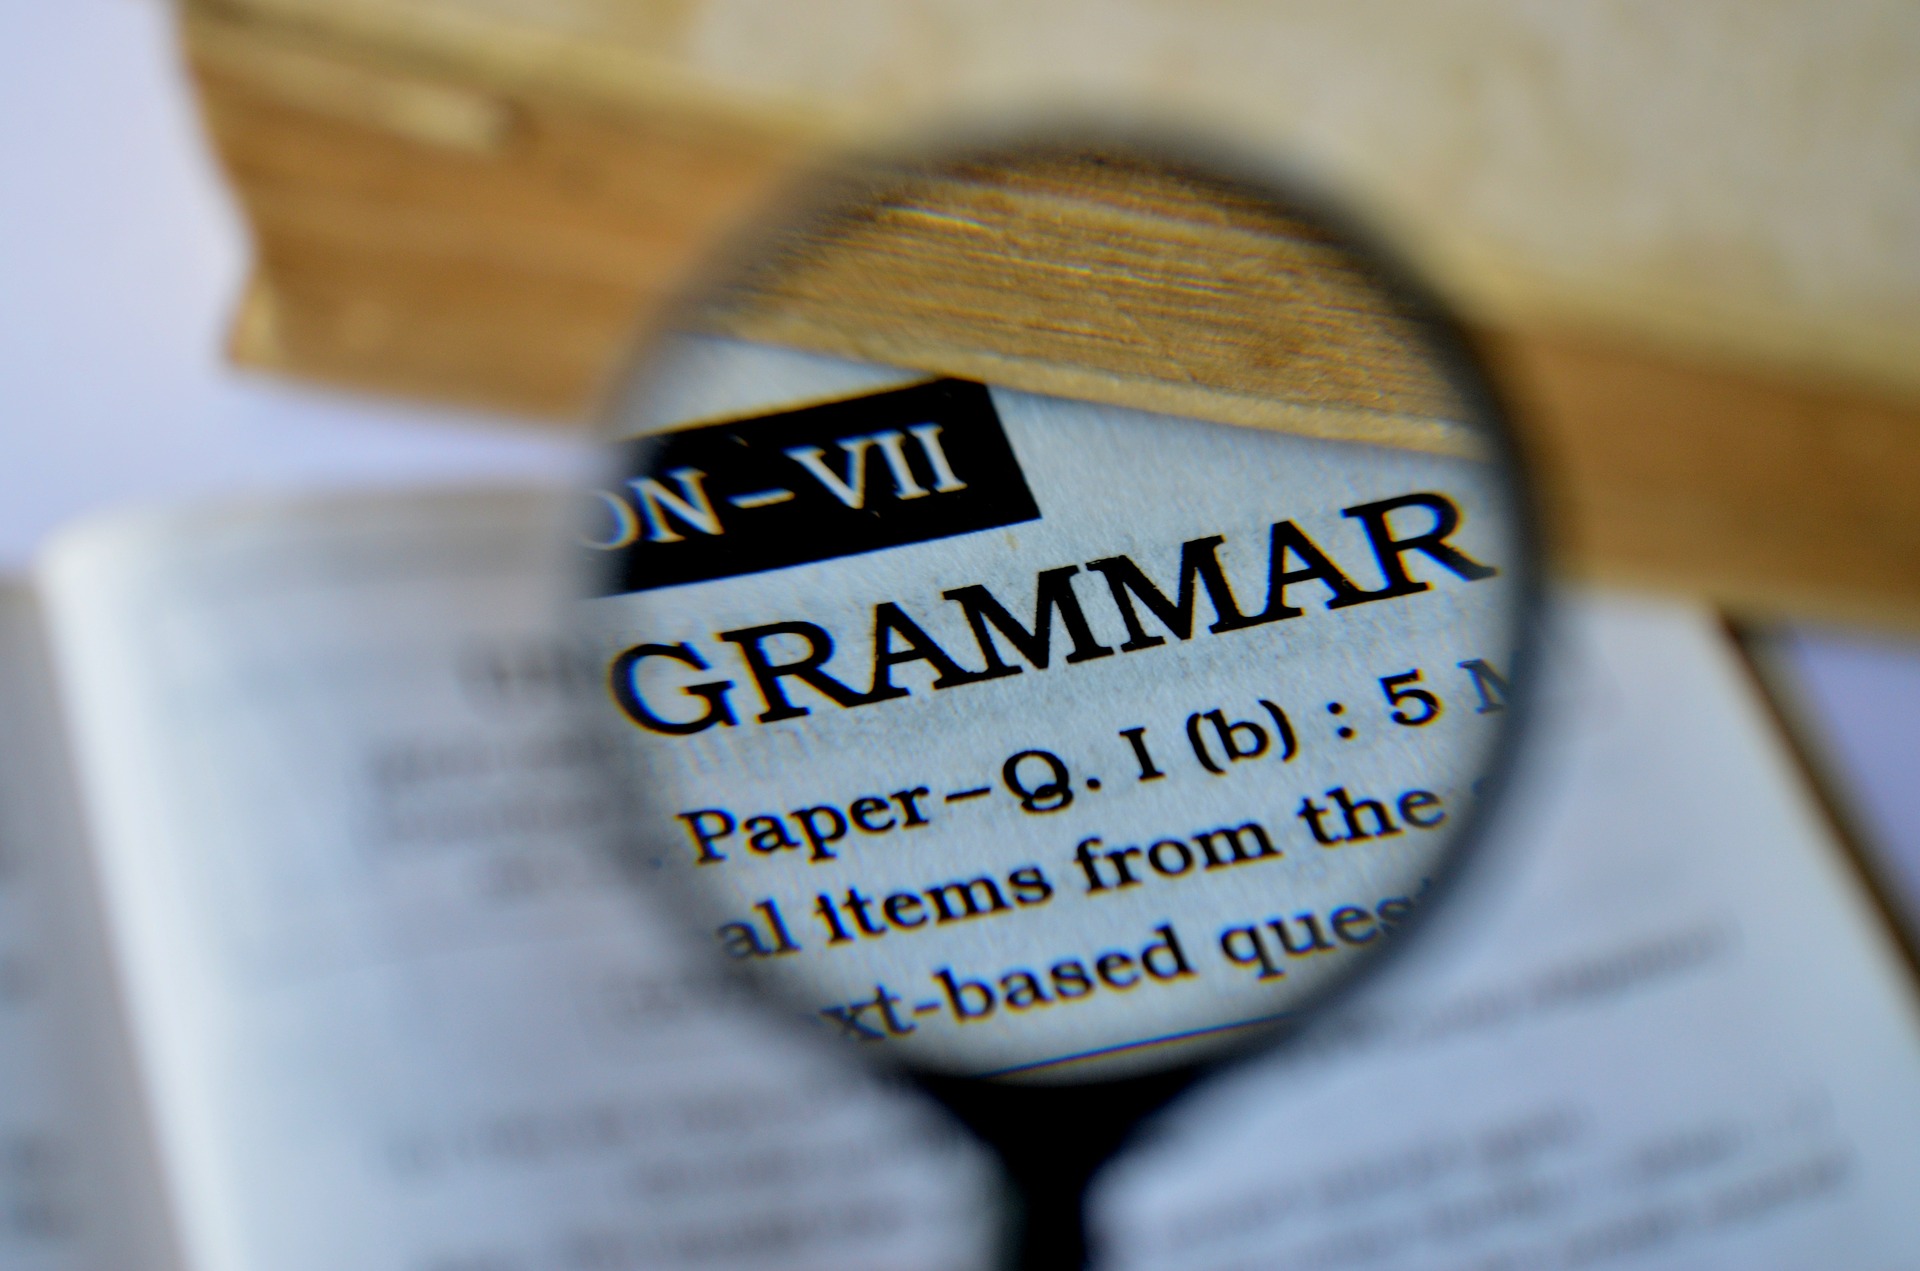 Grammar is how we arrange words in sentences to express what we mean